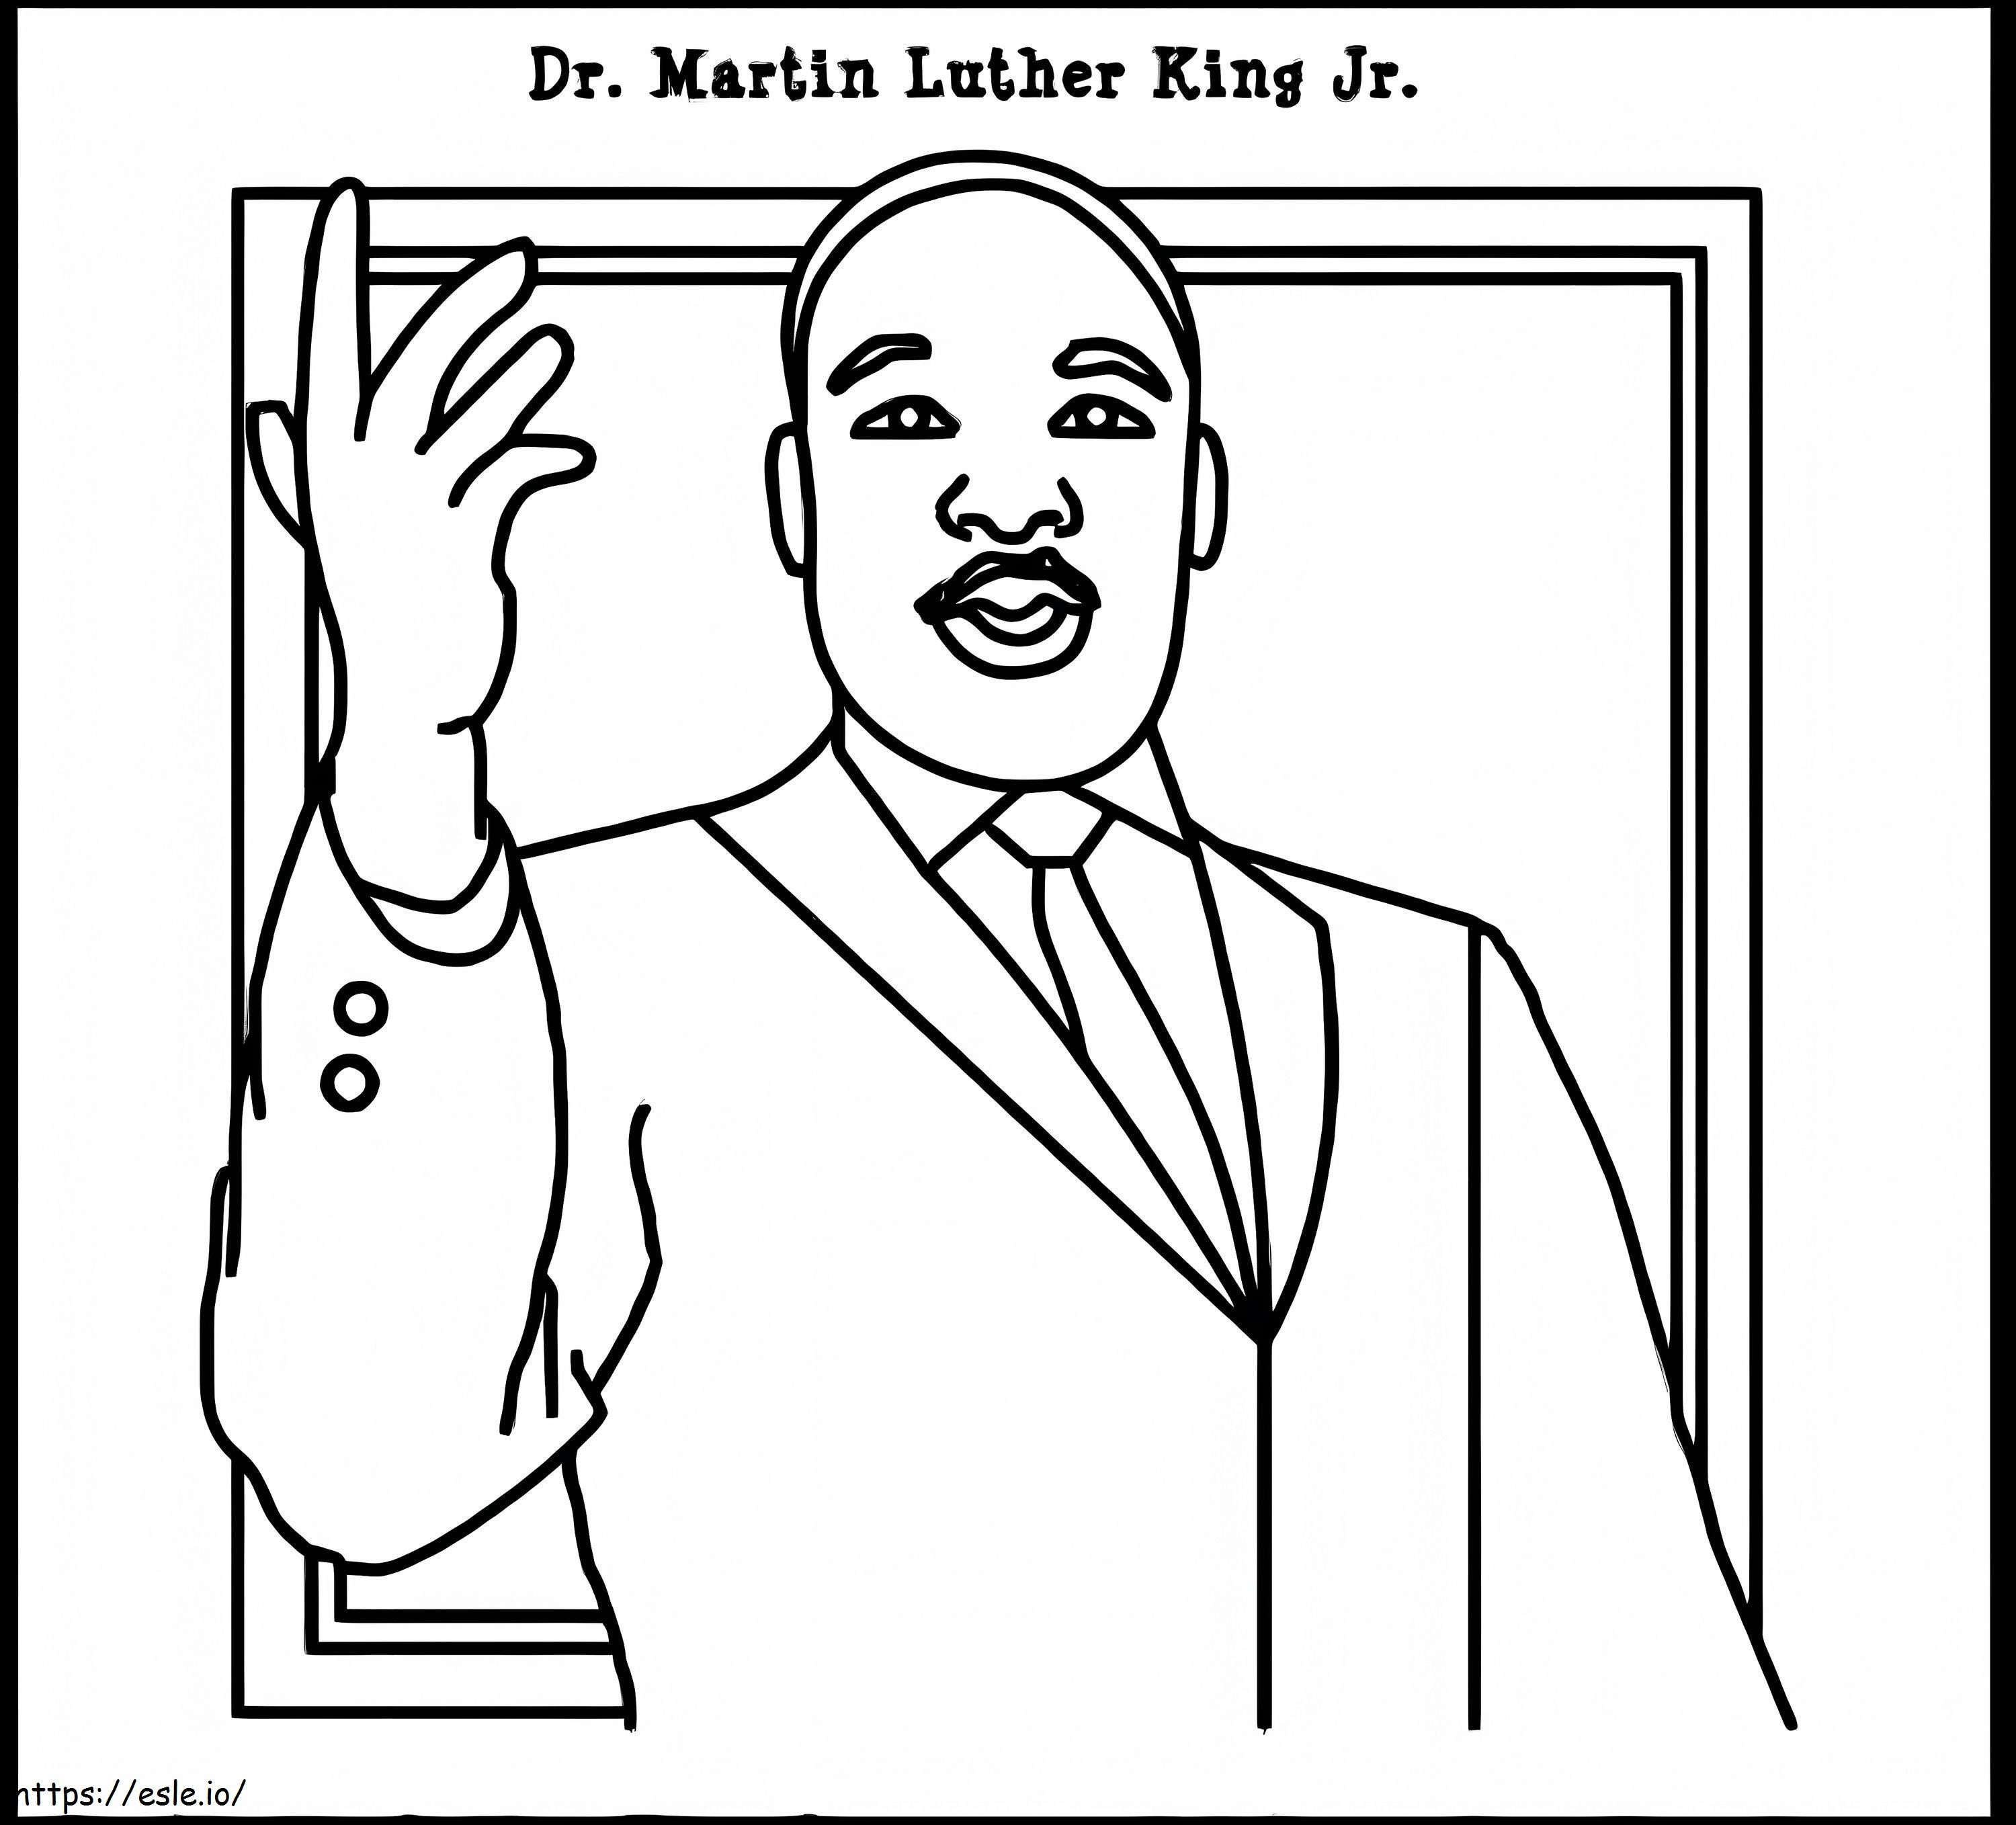 Martin Luther King Jr 8 coloring page